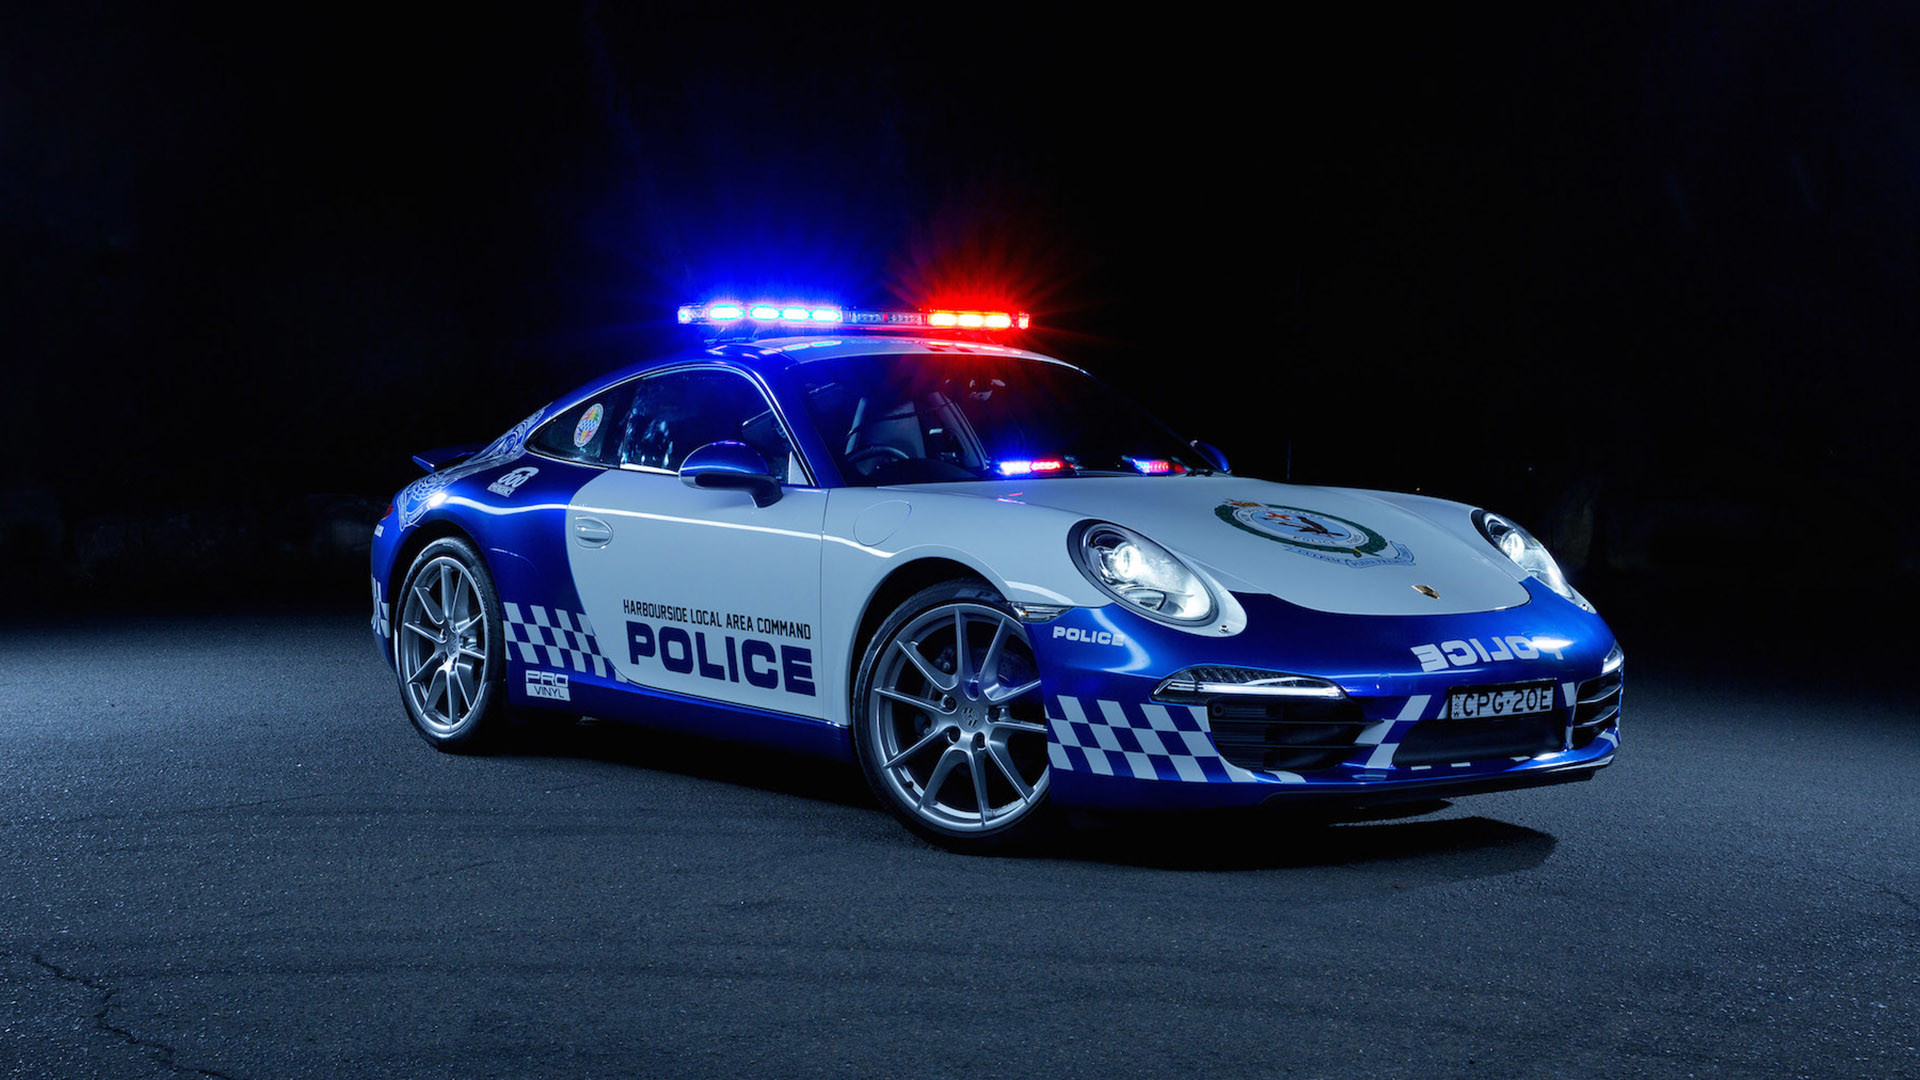 1920x1080  Police Car Wallpapers Widescreen Â· 0 Â· Download Â· Res: 1920x1200  ...